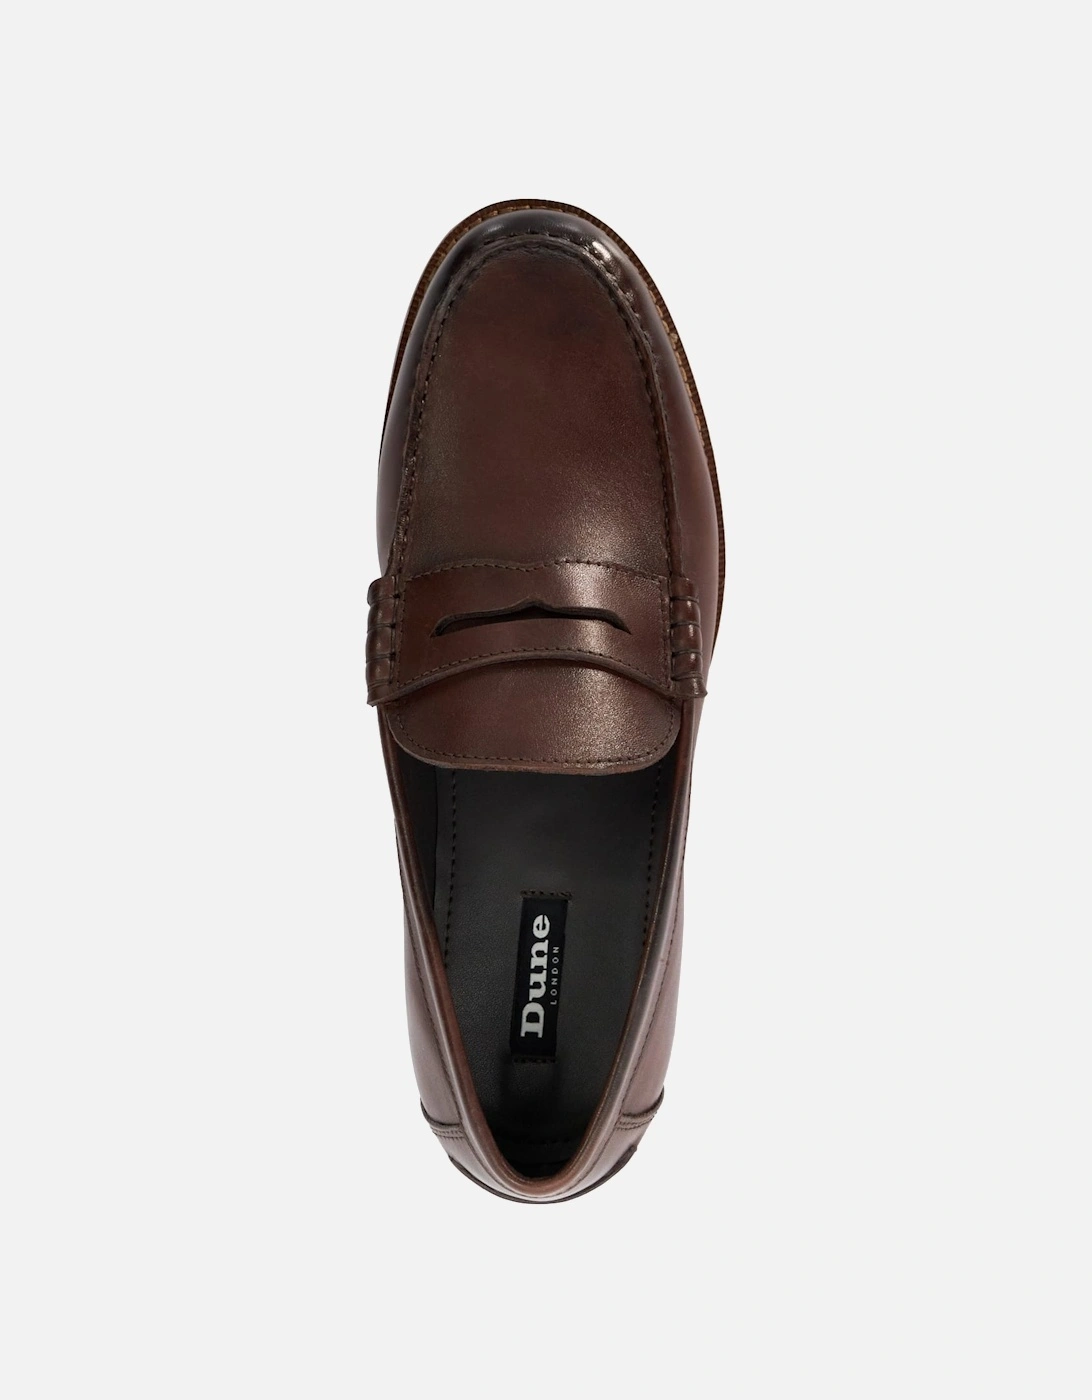 Mens Simsonn - Leather Penny Loafers